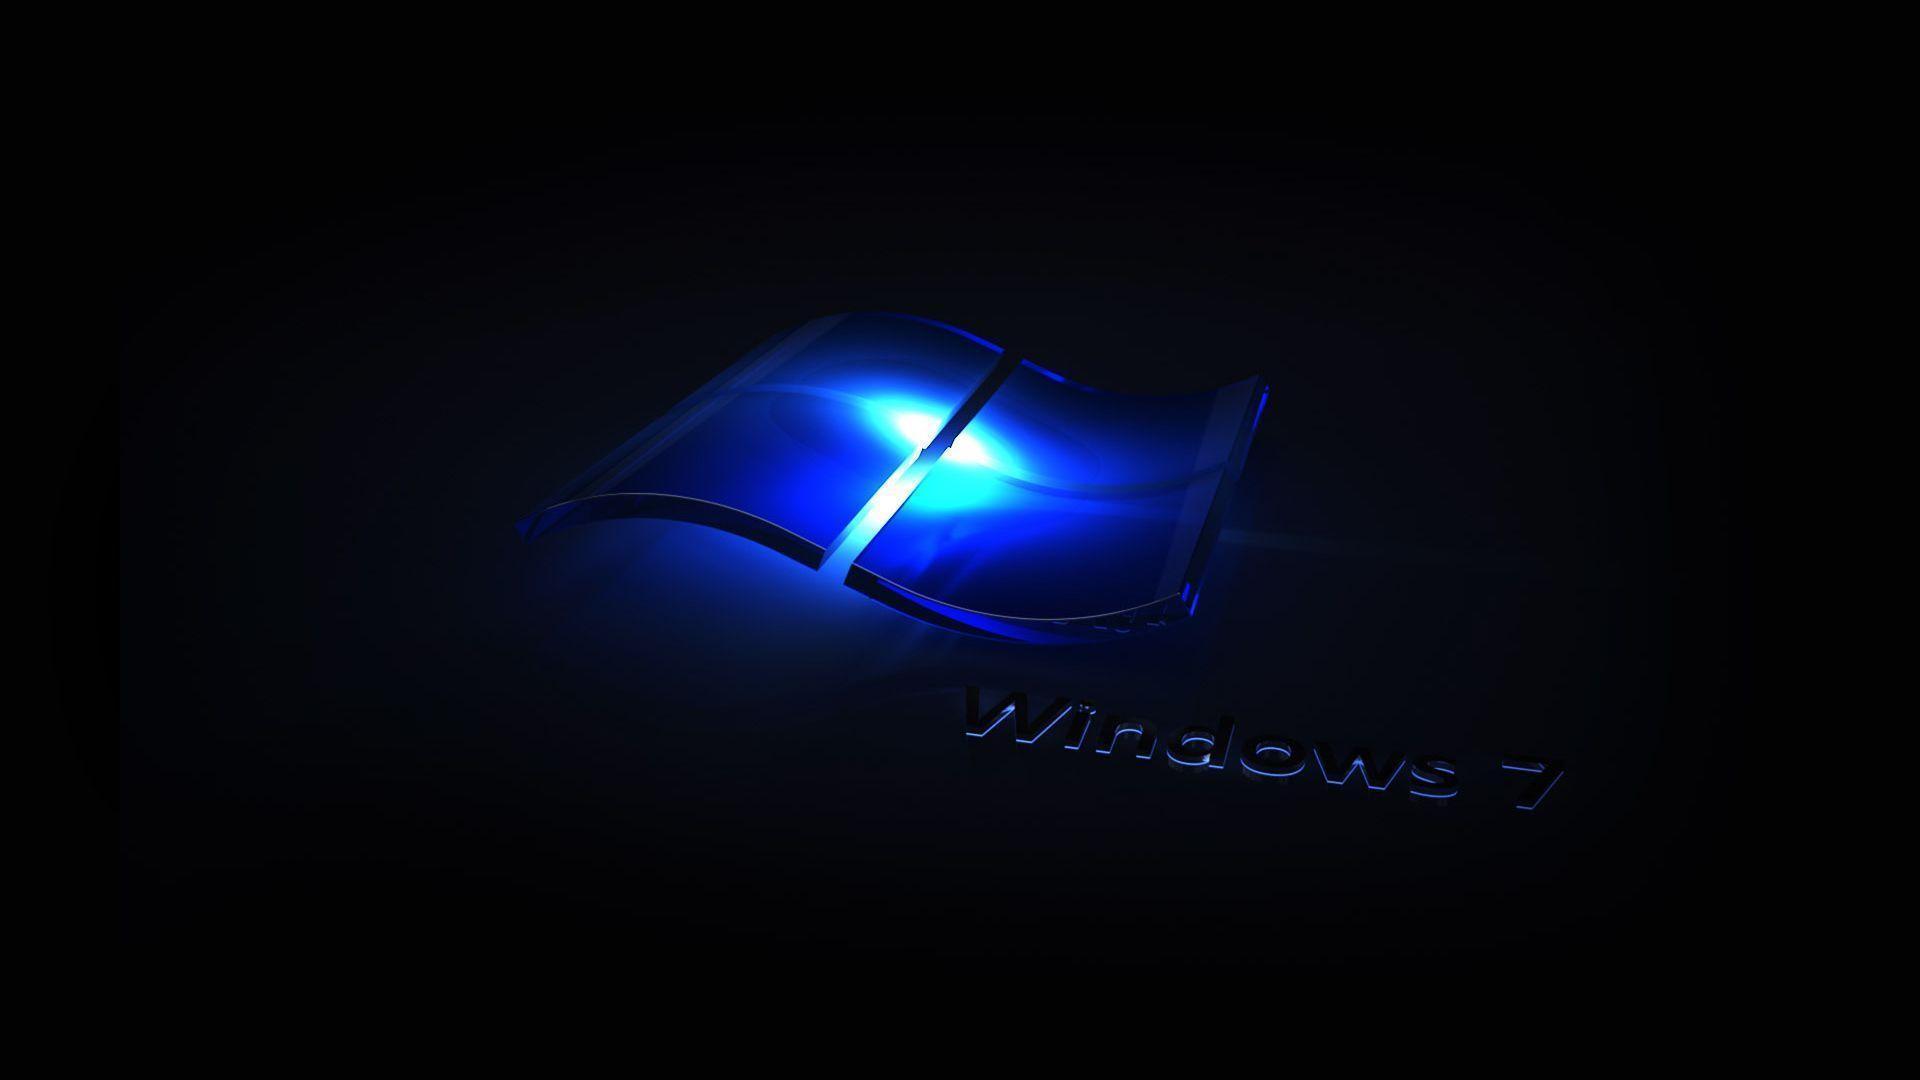 Windows 7 Wallpapers 1920x1080 Pictures to pin